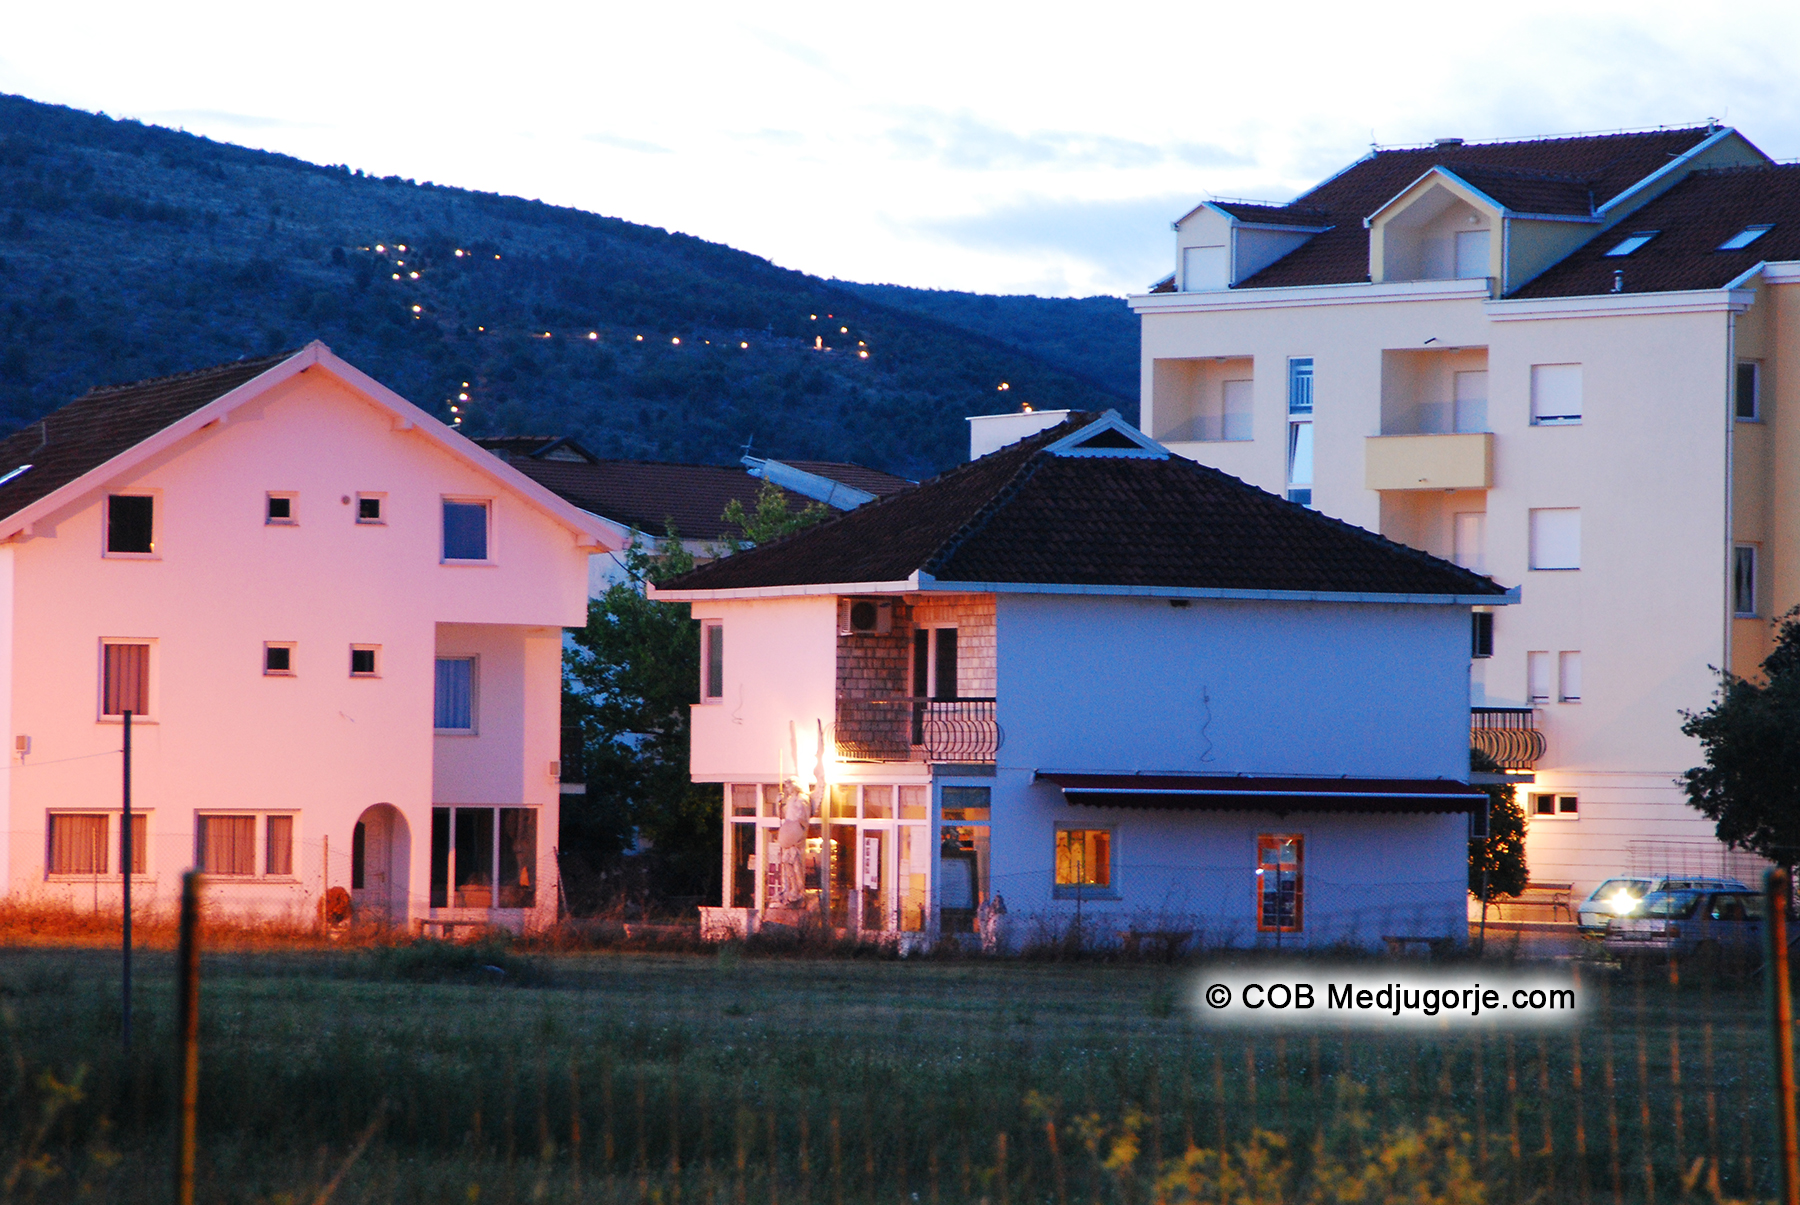 Community of Caritas Mission House in Medjugorje